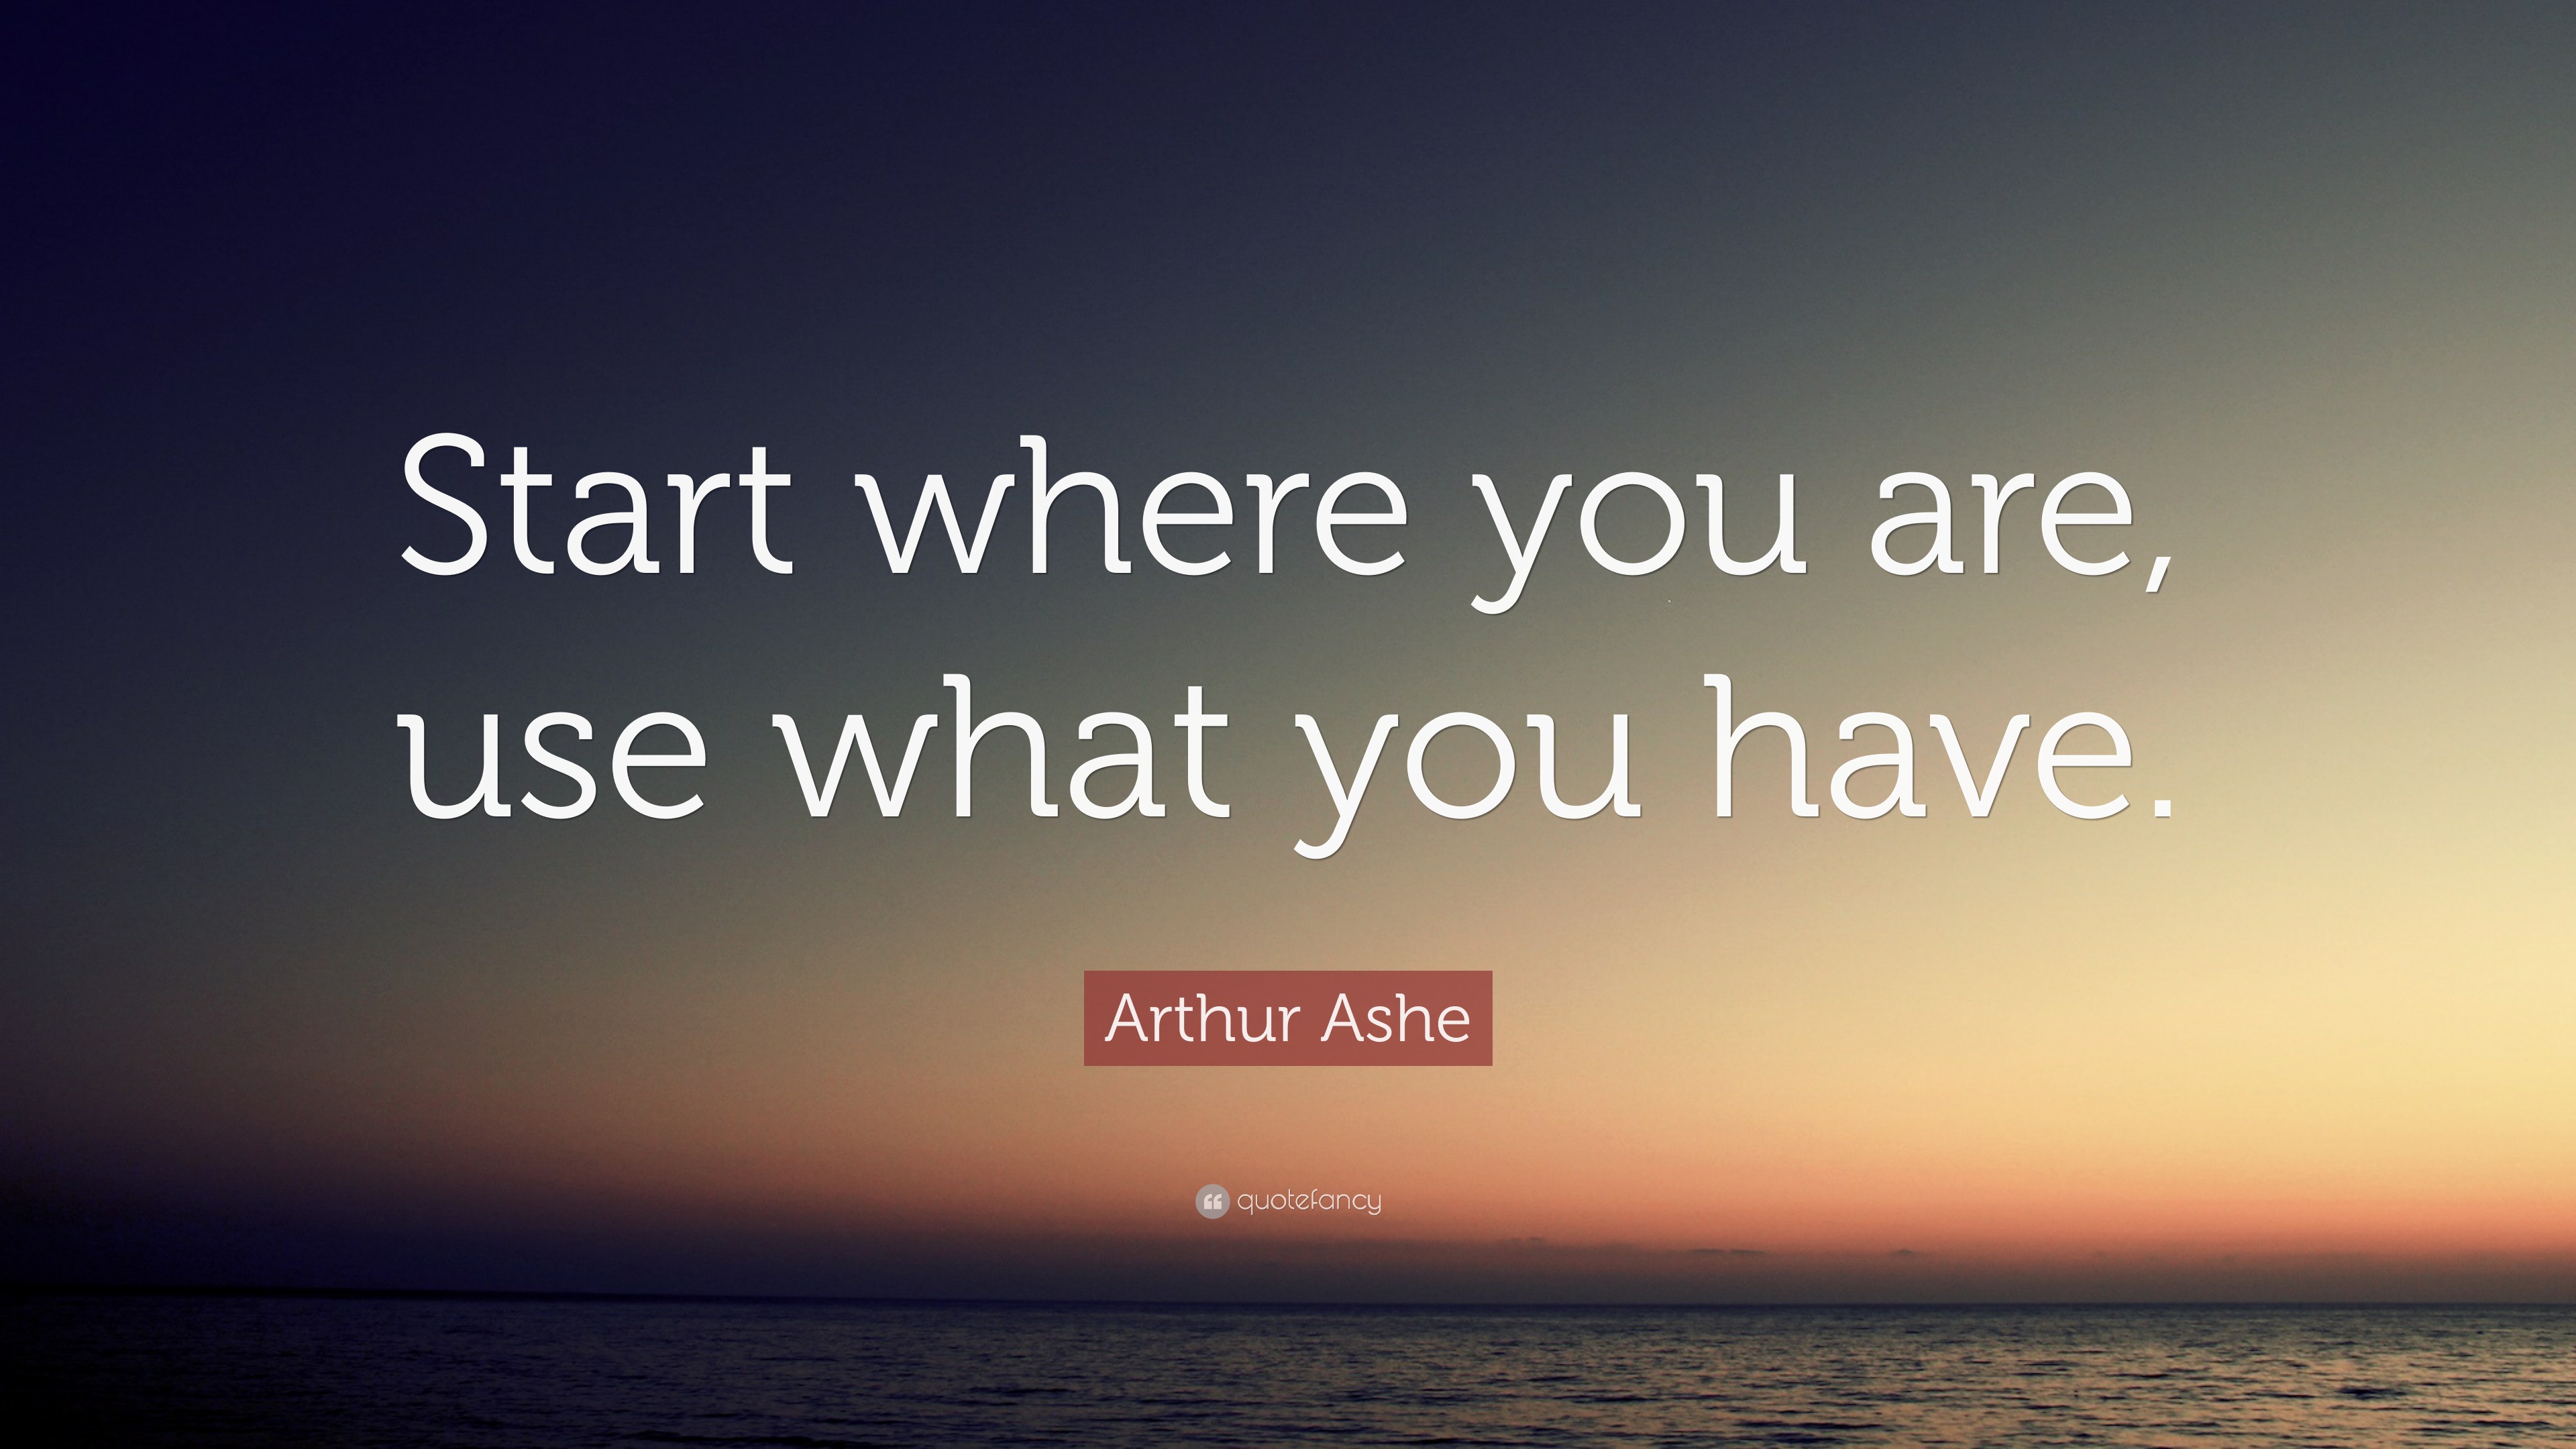 Arthur Ashe Quote “start Where You Are Use What You Have”